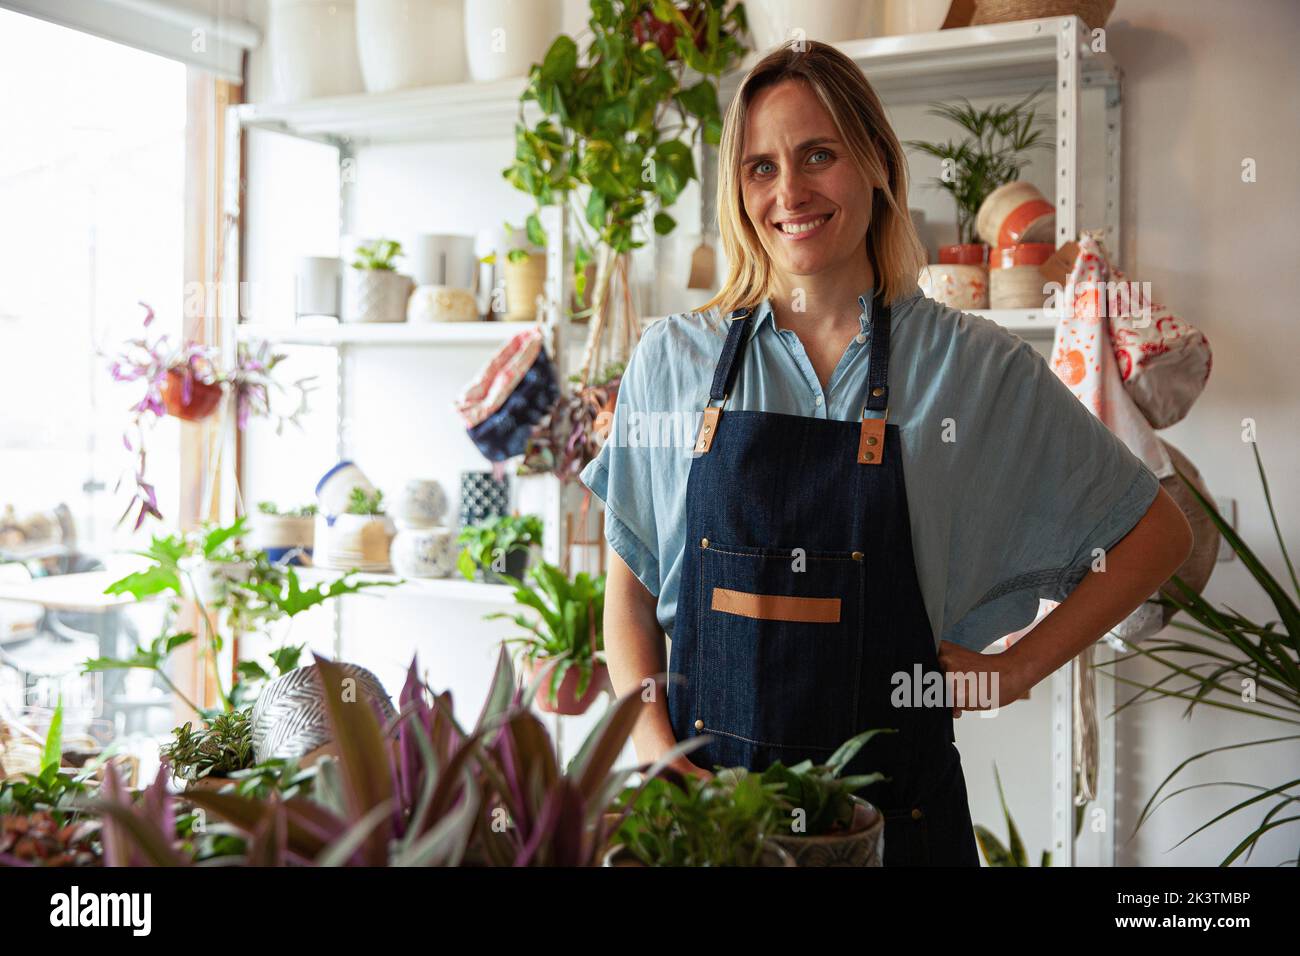 Adult plant store worker wearing apron while looking at the camera Stock Photo